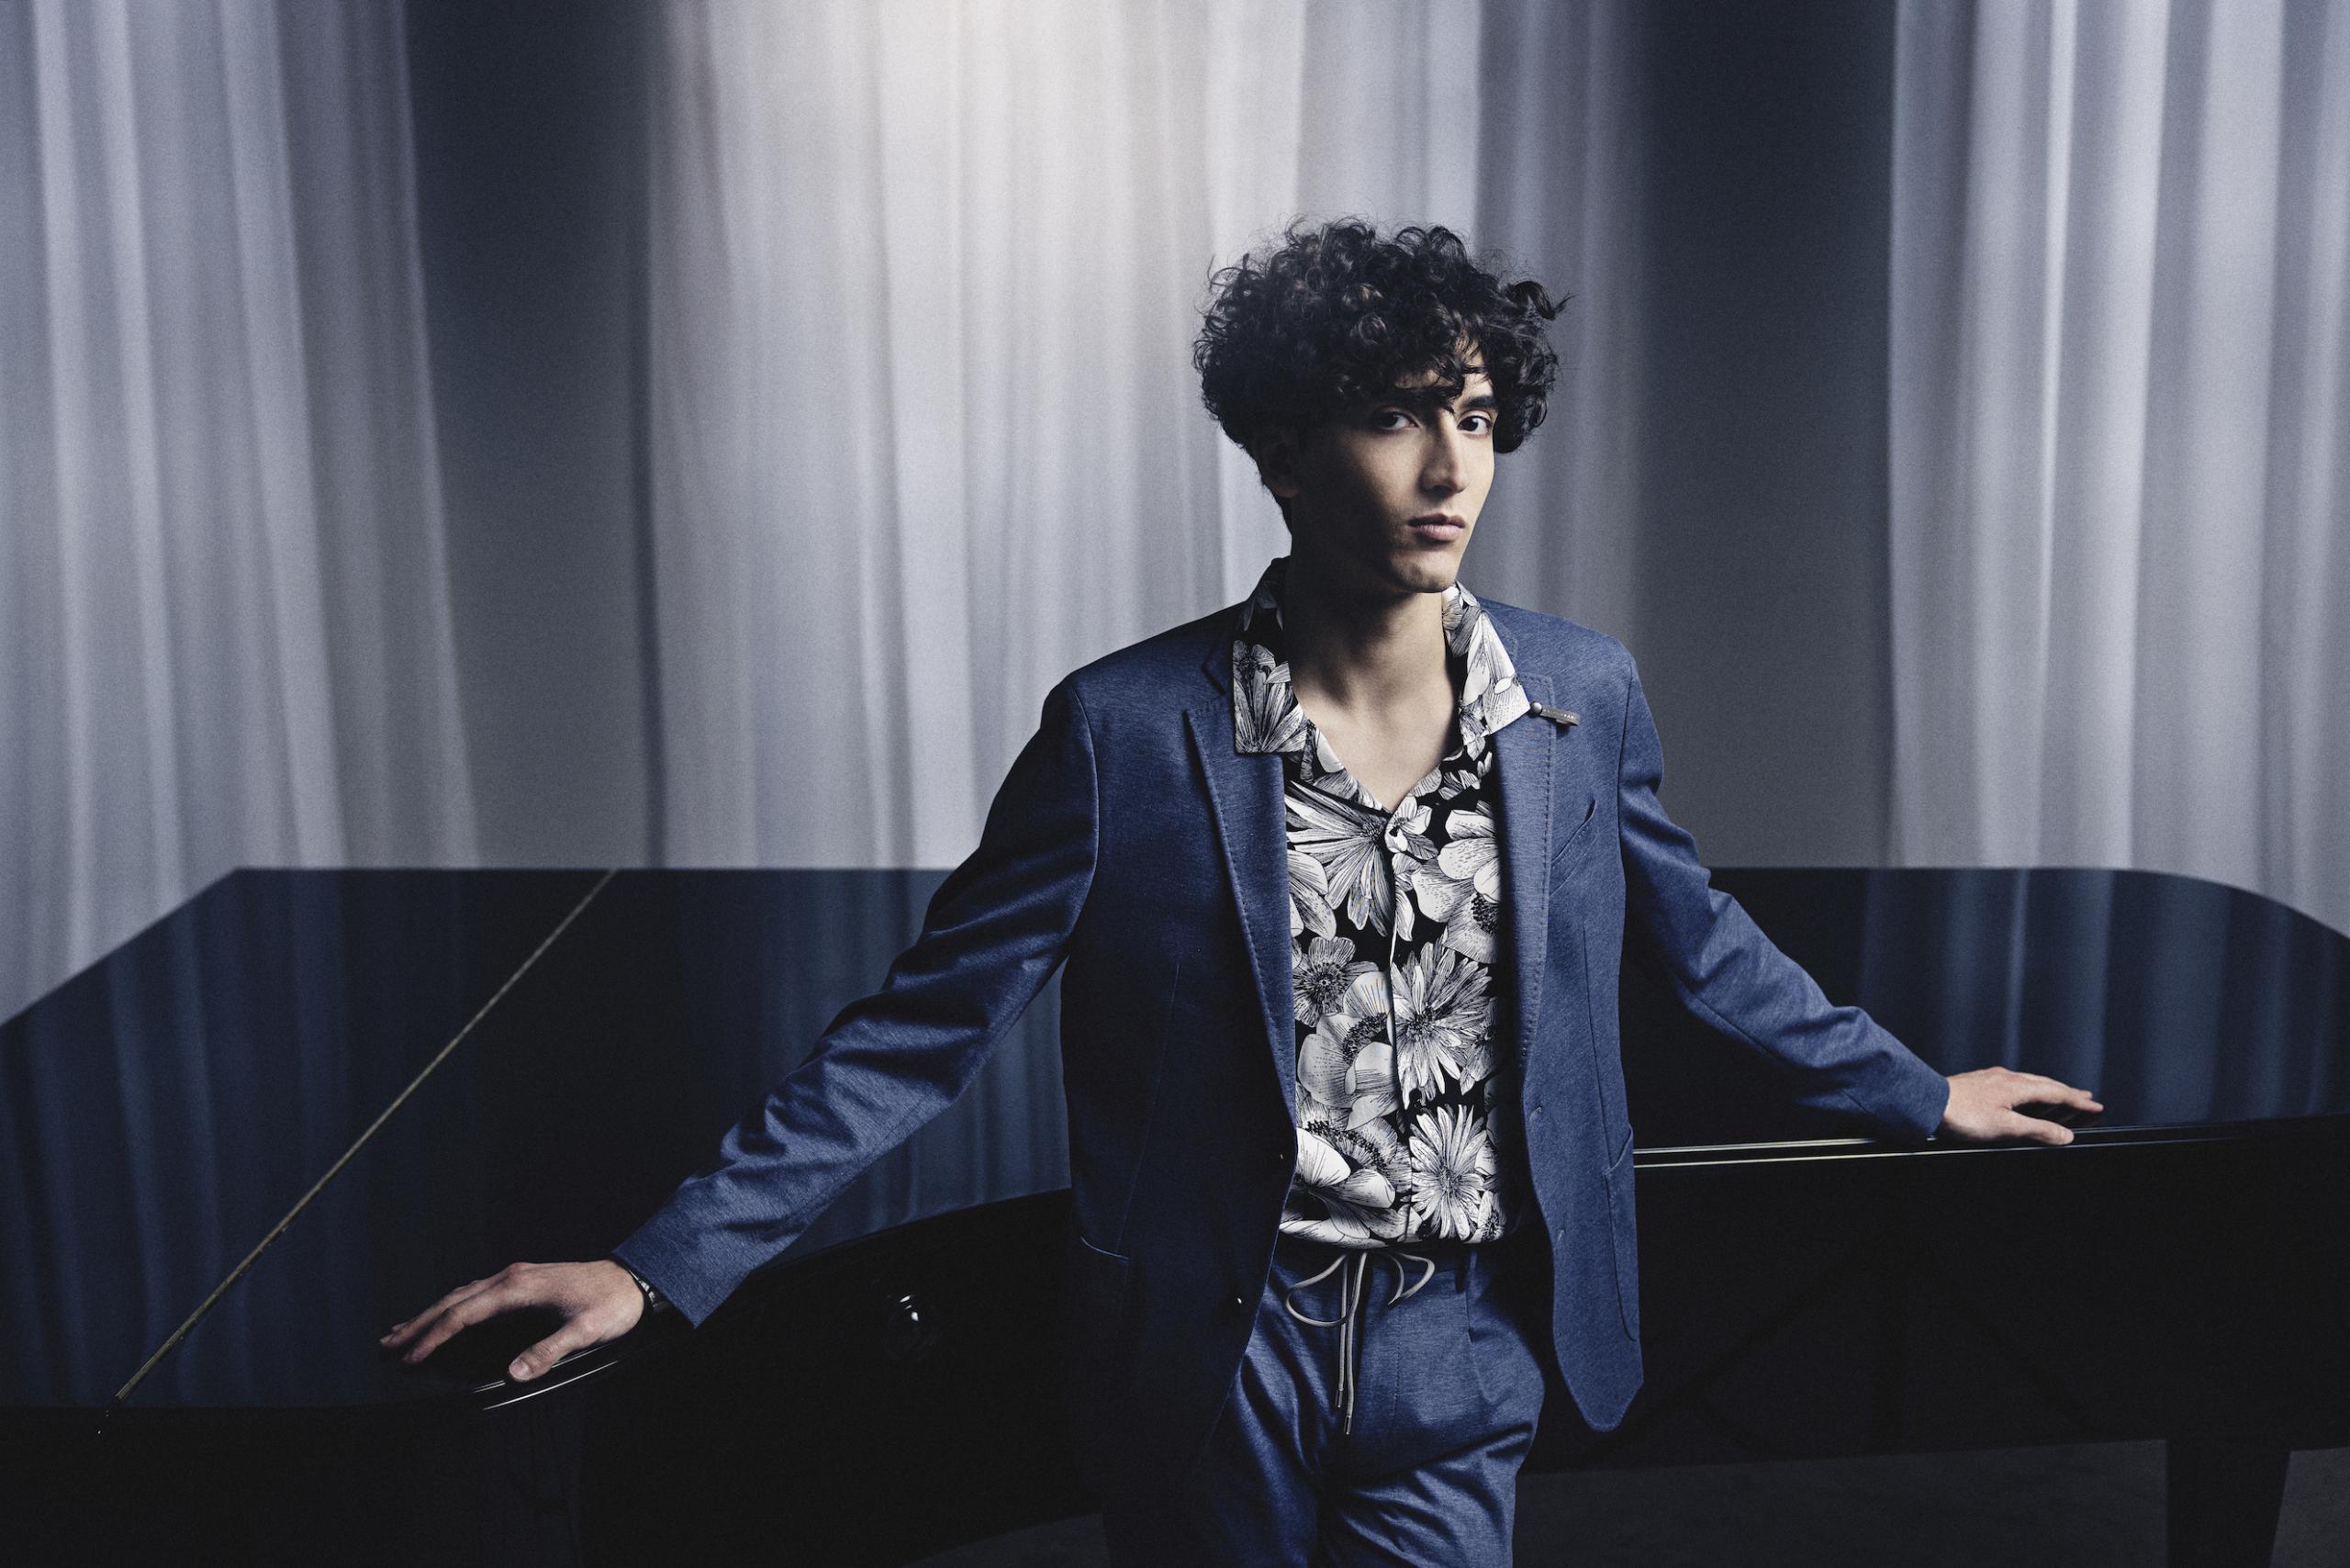 Portrait of the pianist Roman Borisov. He is standing in front of a grand piano in a blue suit with a patterned shirt.